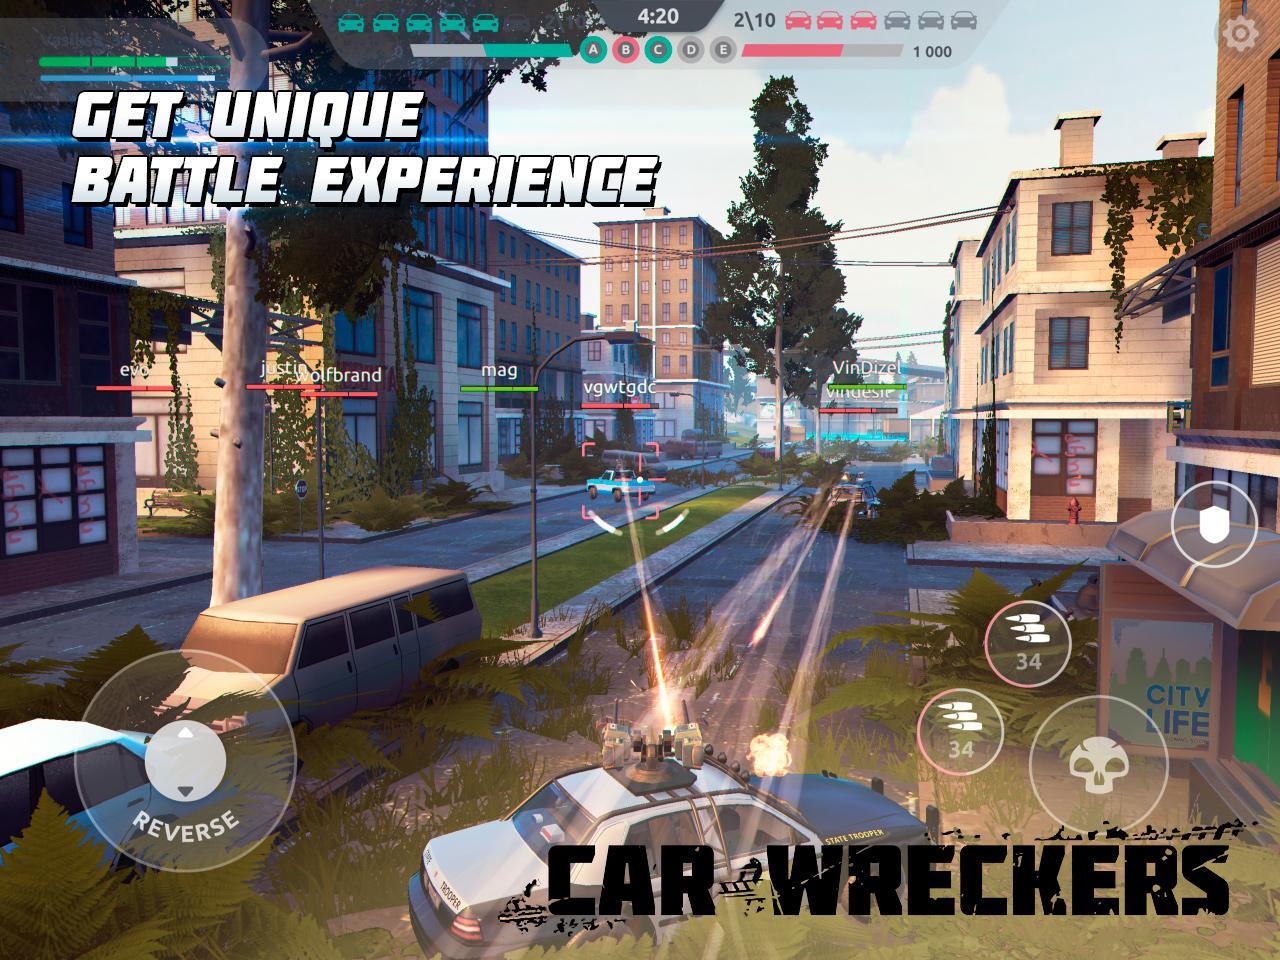 Car Wreckers for Android - APK Download - 